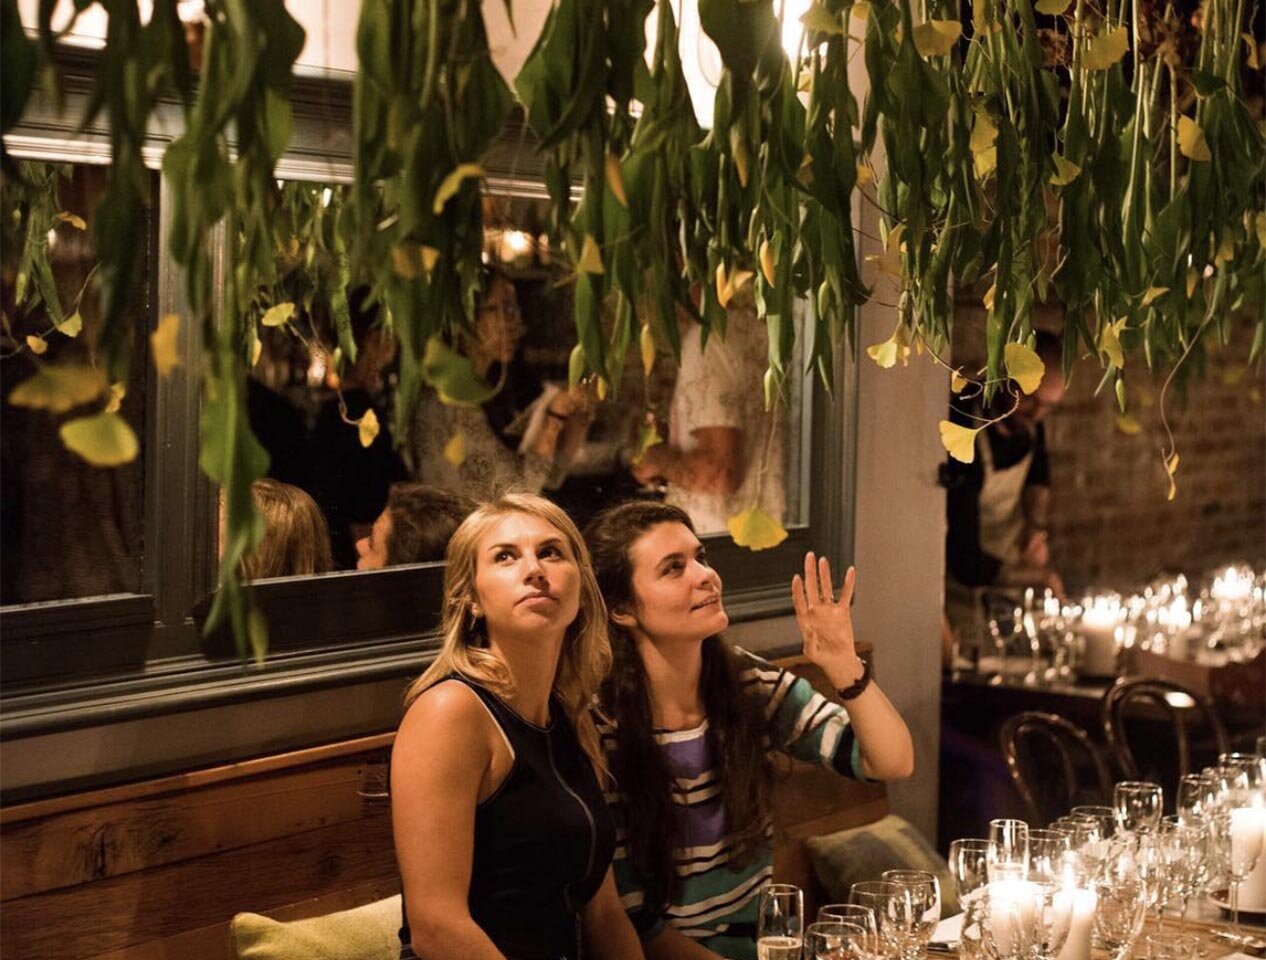 Two guests look up at the floral arrangements at Silo NYC.